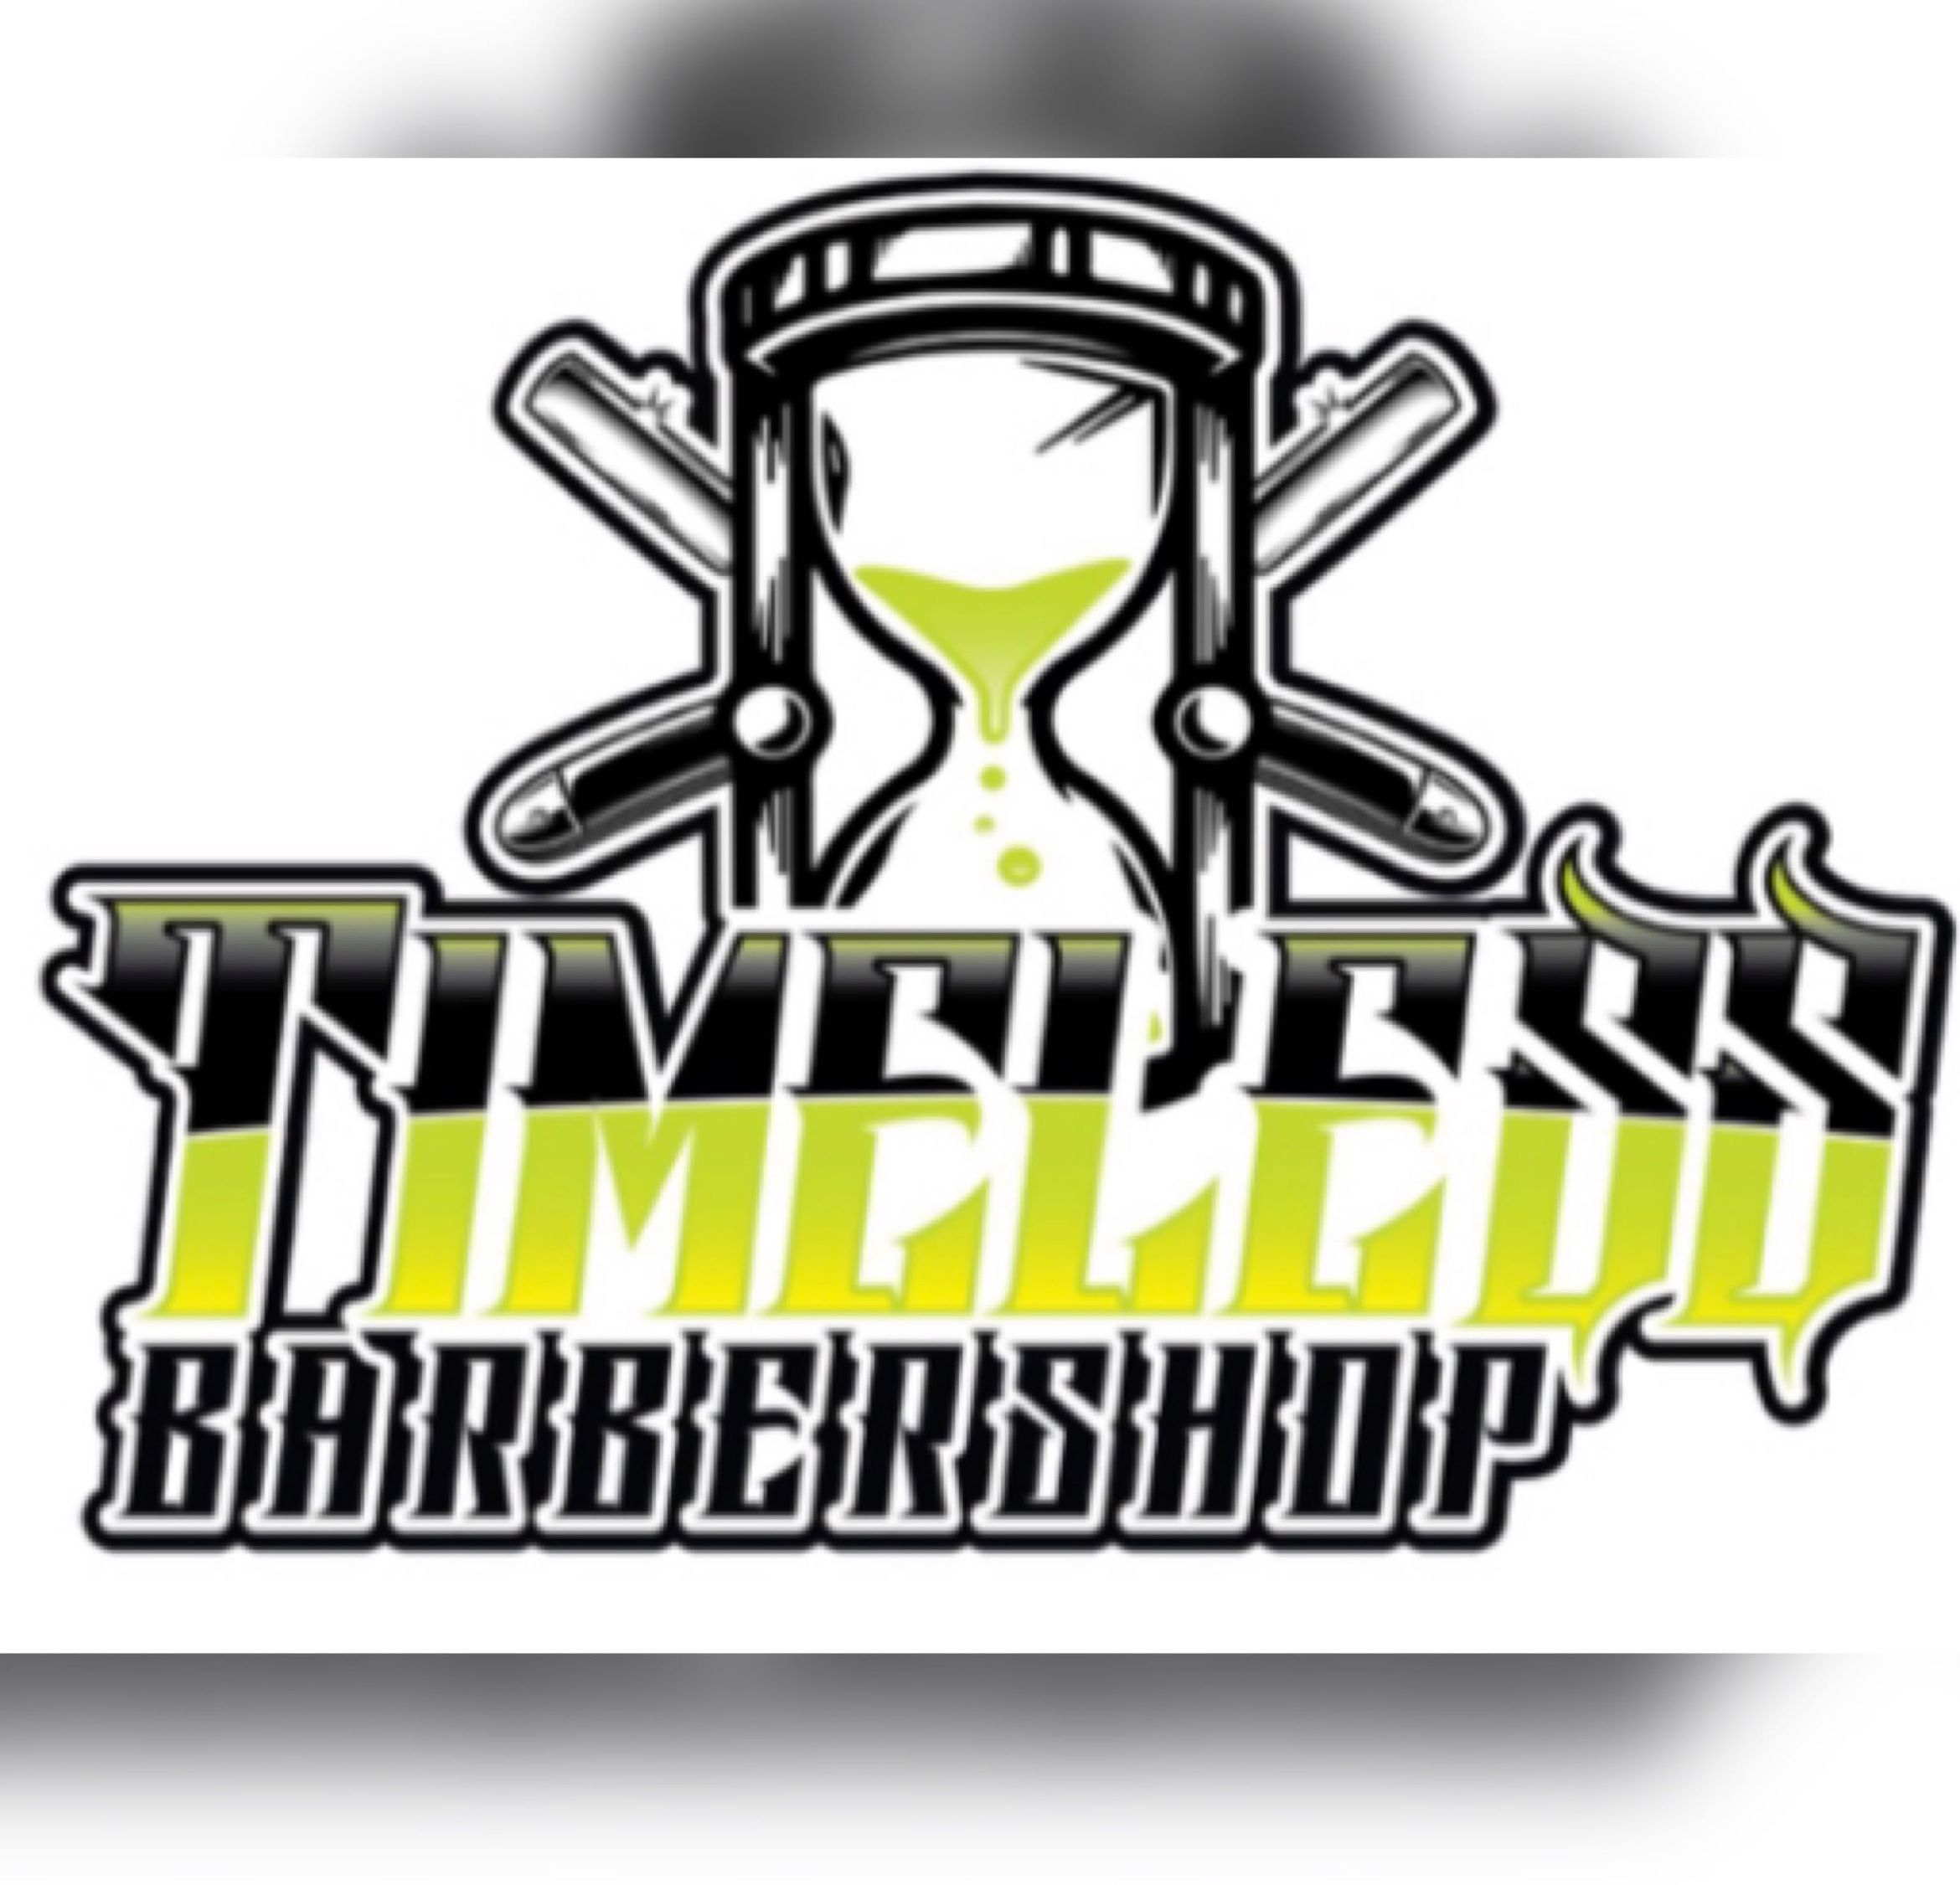 Timeless Barber, 2558 US Highway 17 92 N, Haines City, 33844